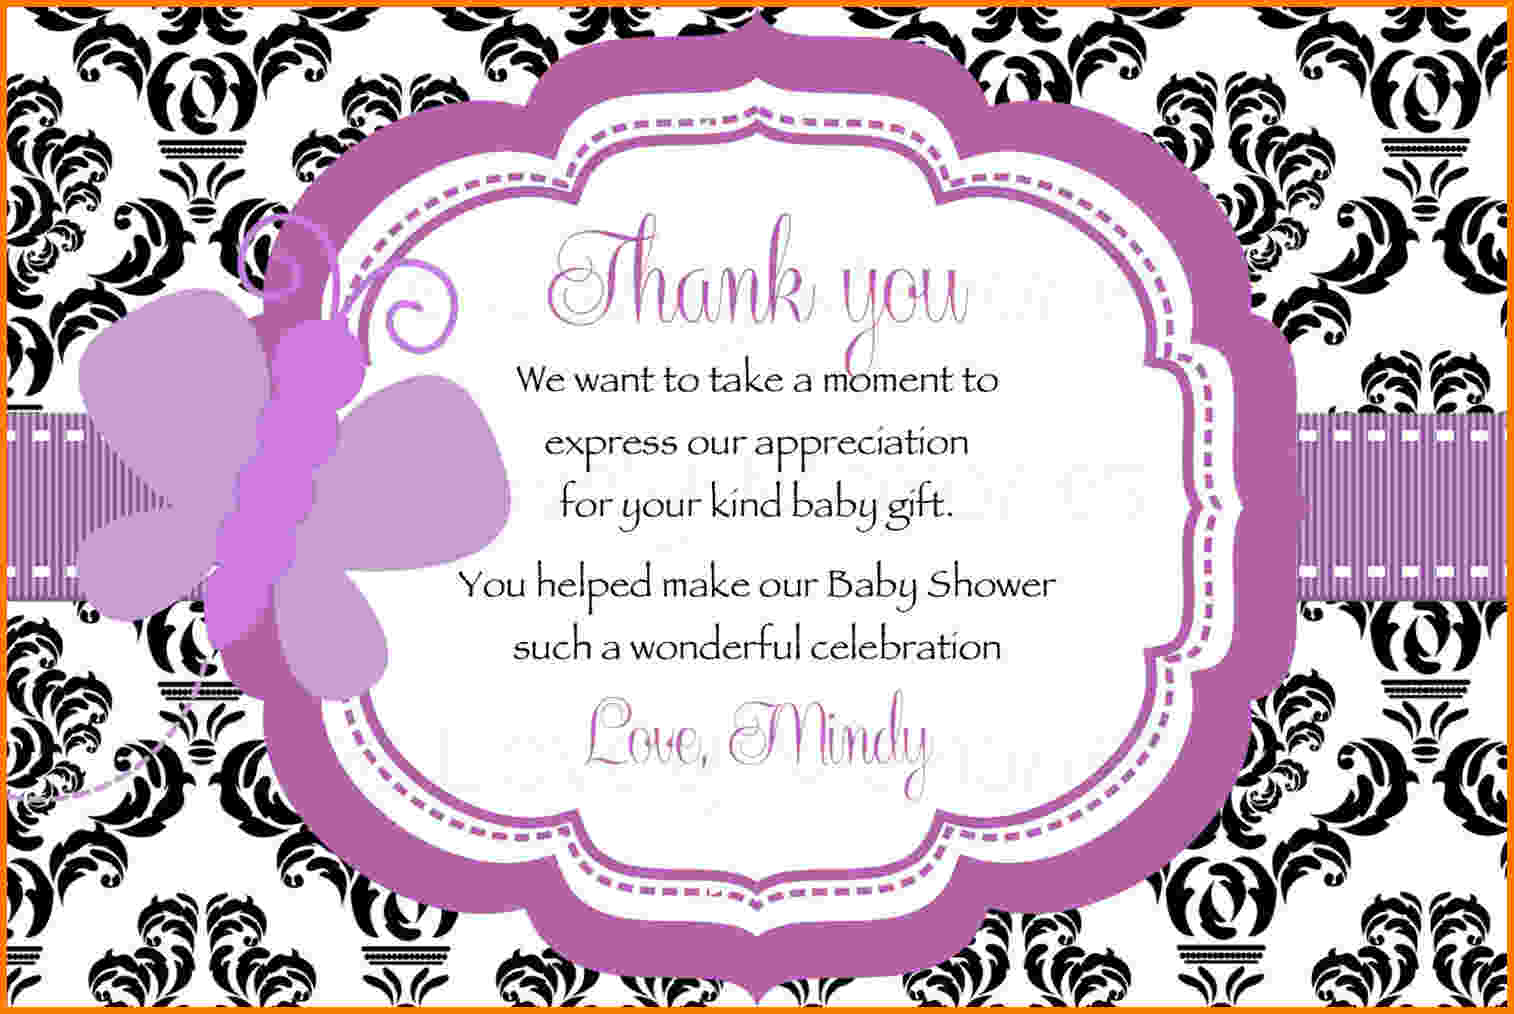 Full Size of Baby Shower:36+ Retro Baby Shower Thank You Wording Image Concepts 3 Baby Shower Thank You Cards Wording Card Authorization 2017 3 Baby Shower Thank You Cards Wording